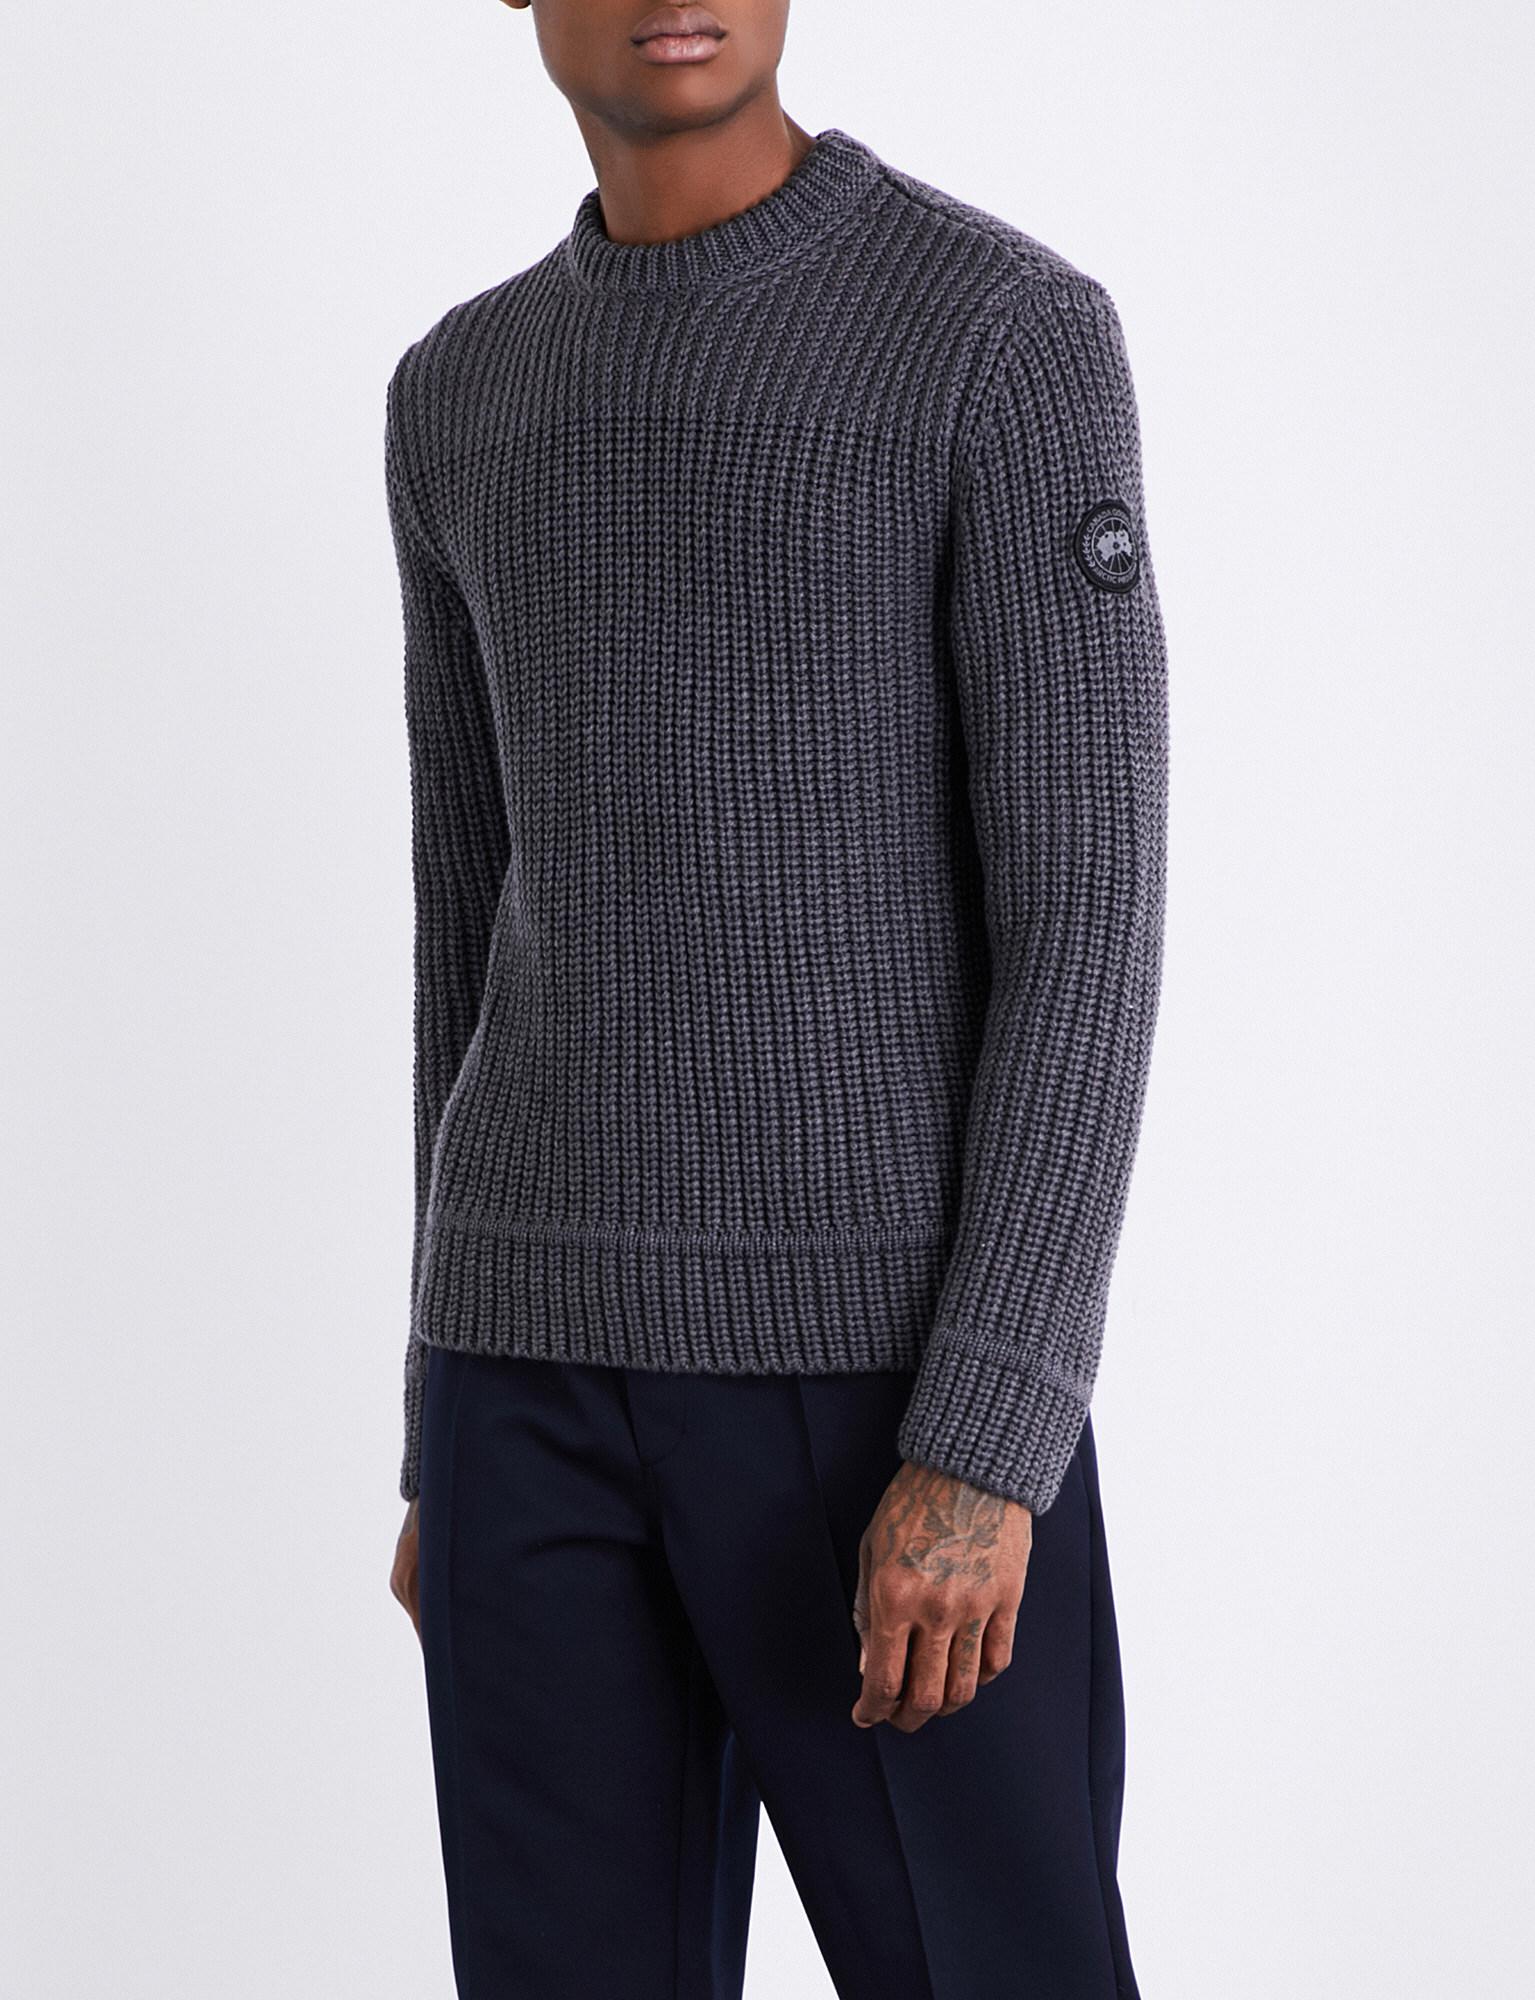 Canada Goose Galloway Wool Jumper in Iron Grey (Gray) for Men - Lyst